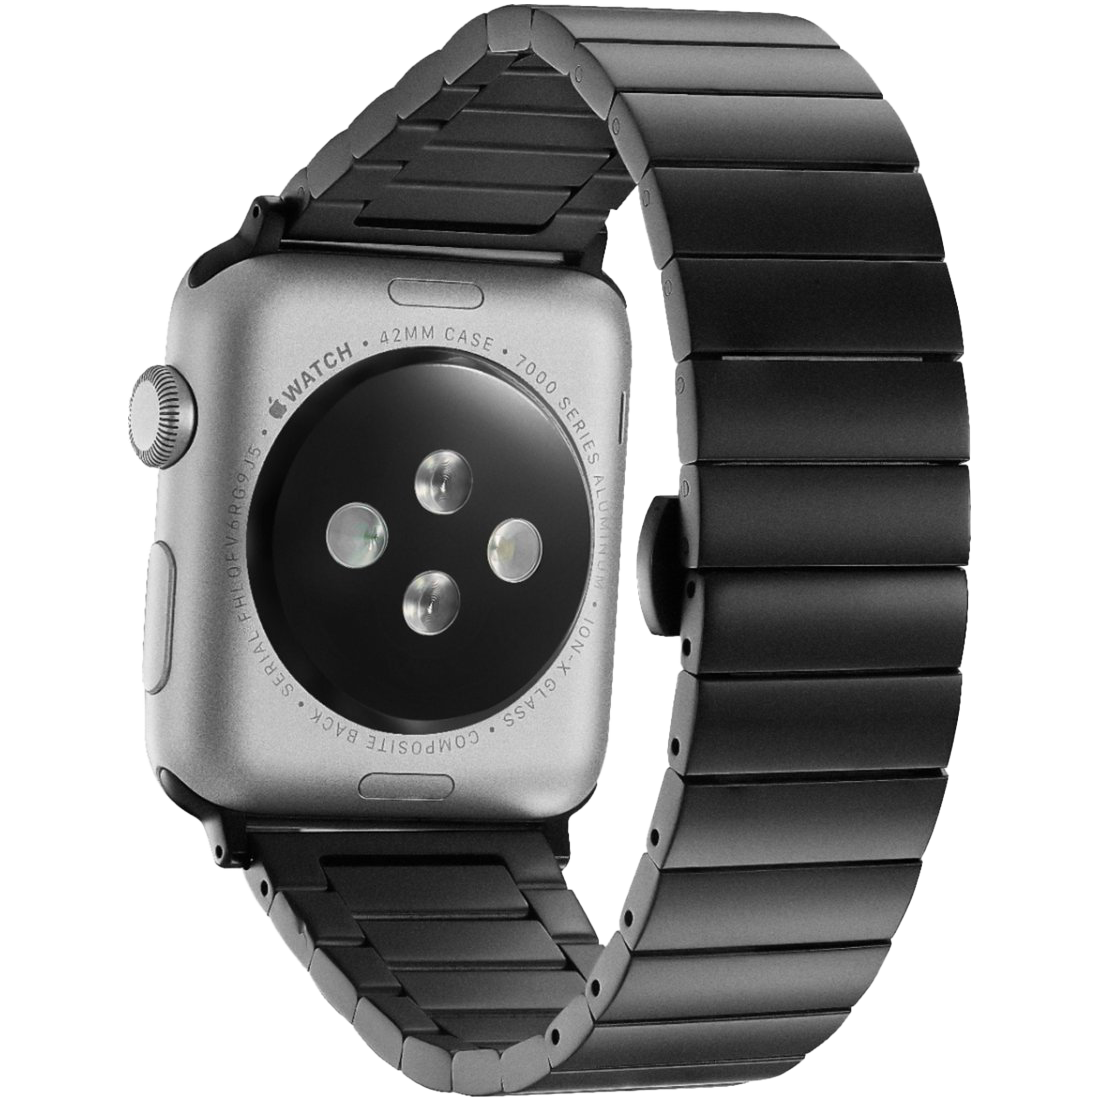 Platinum Stainless Steel Link Band for Apple Watch